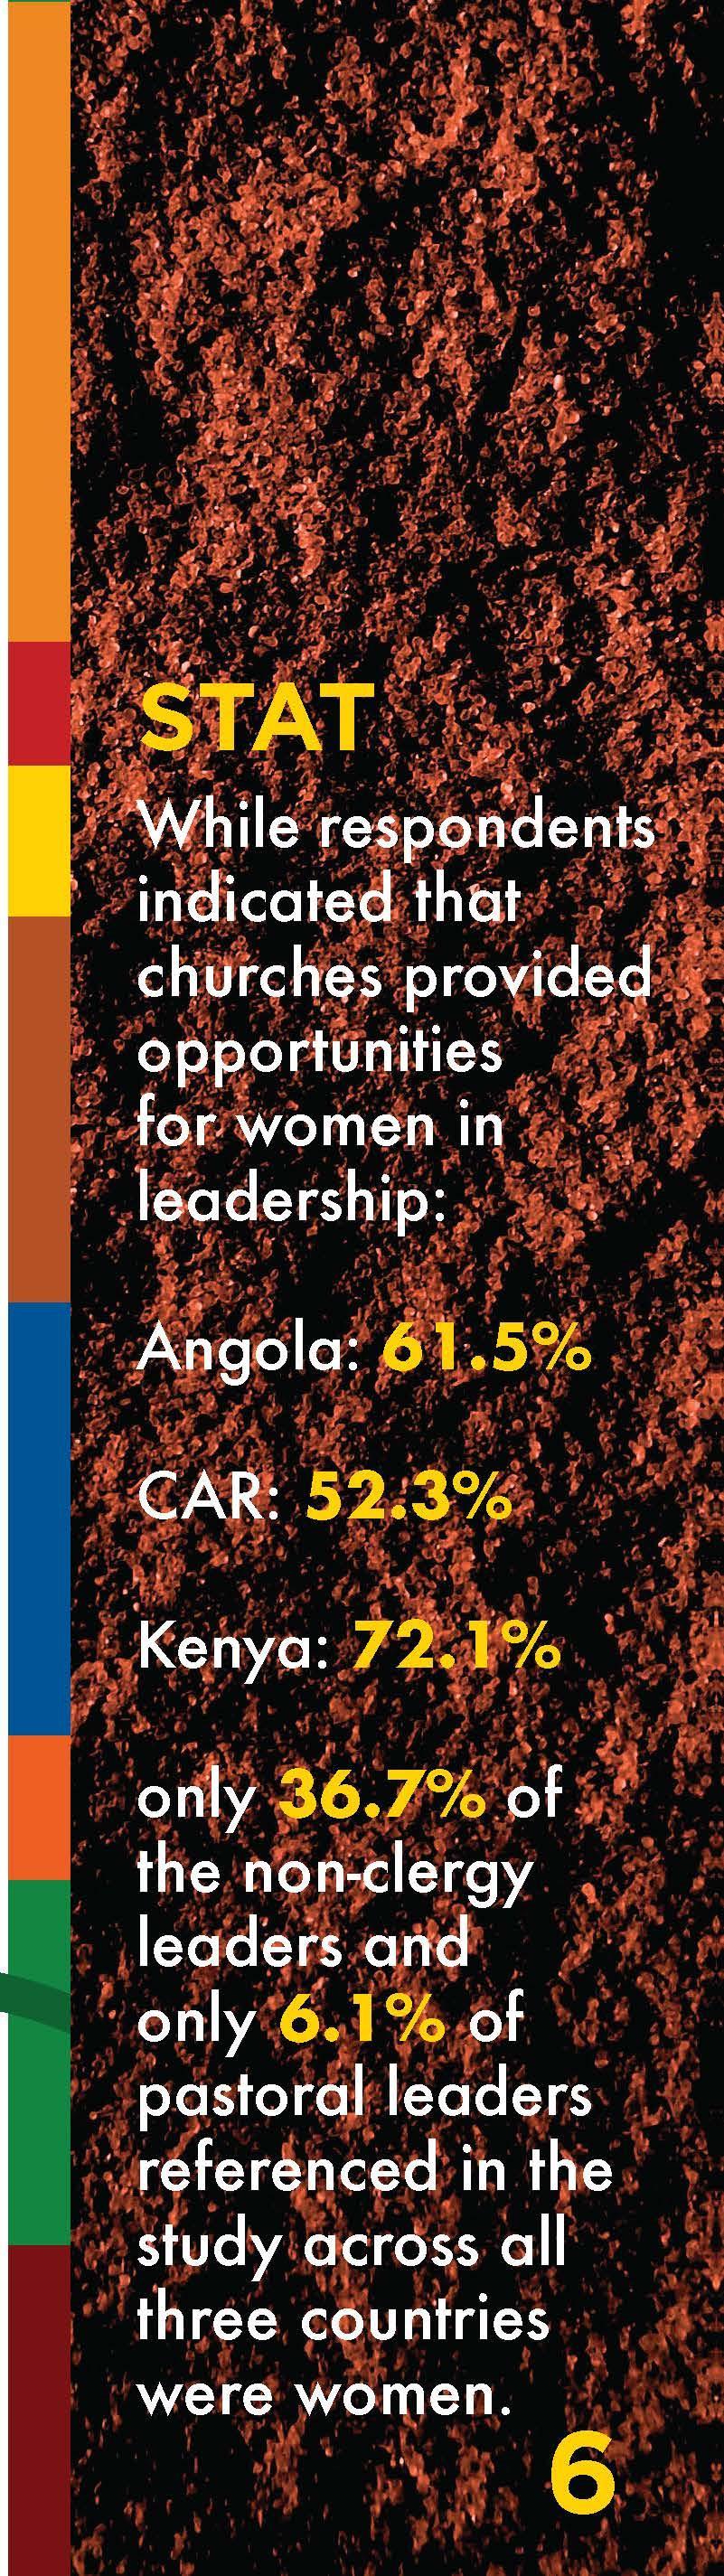 Insight 4 Women, who make up 60% - 70% of the African church, are seen as strategic